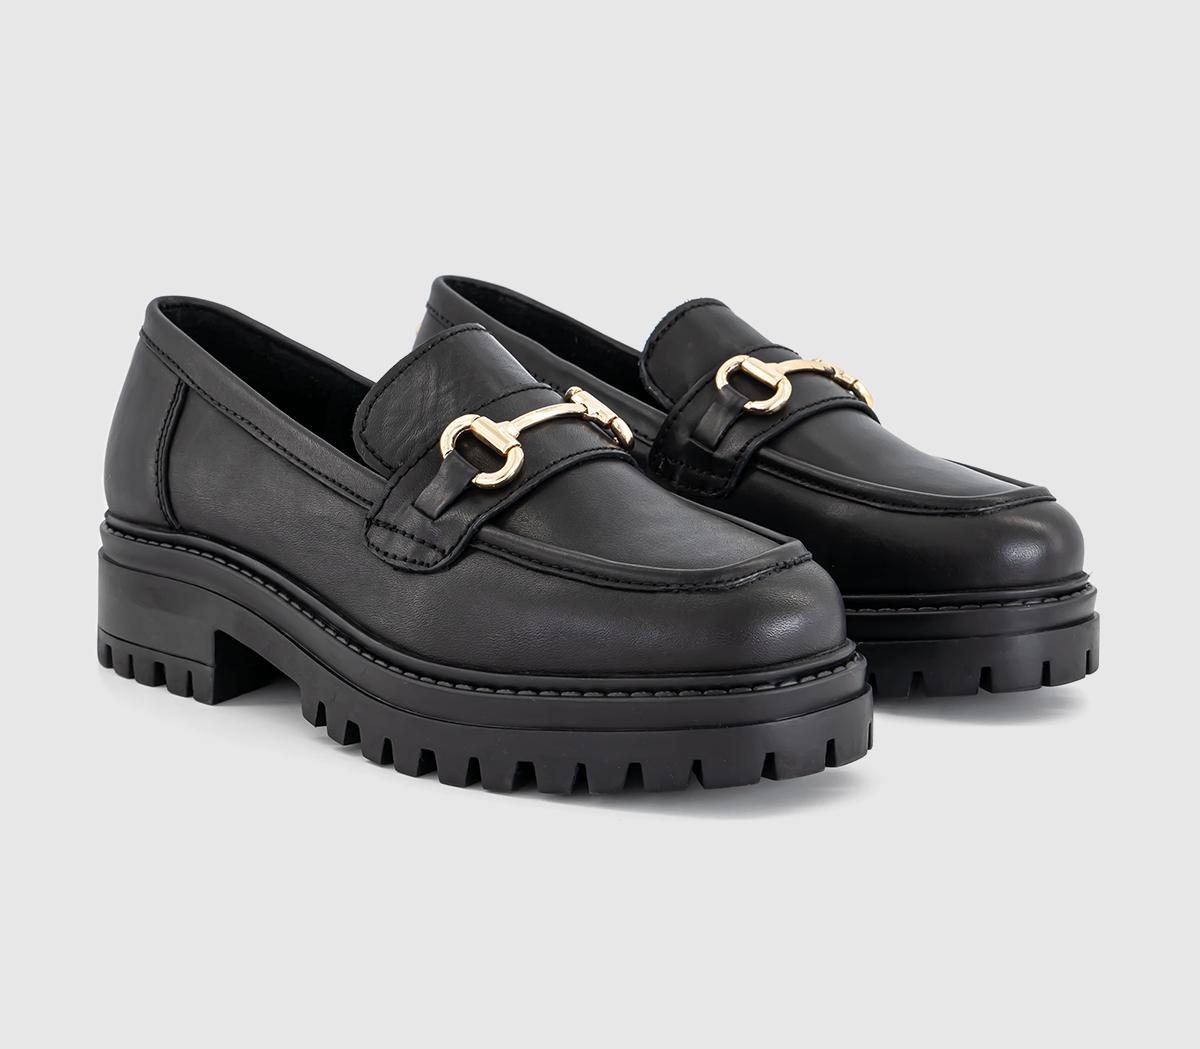 OFFICE Womens Fairhope Chunky Snaffle Trim Loafers Black Leather, 8